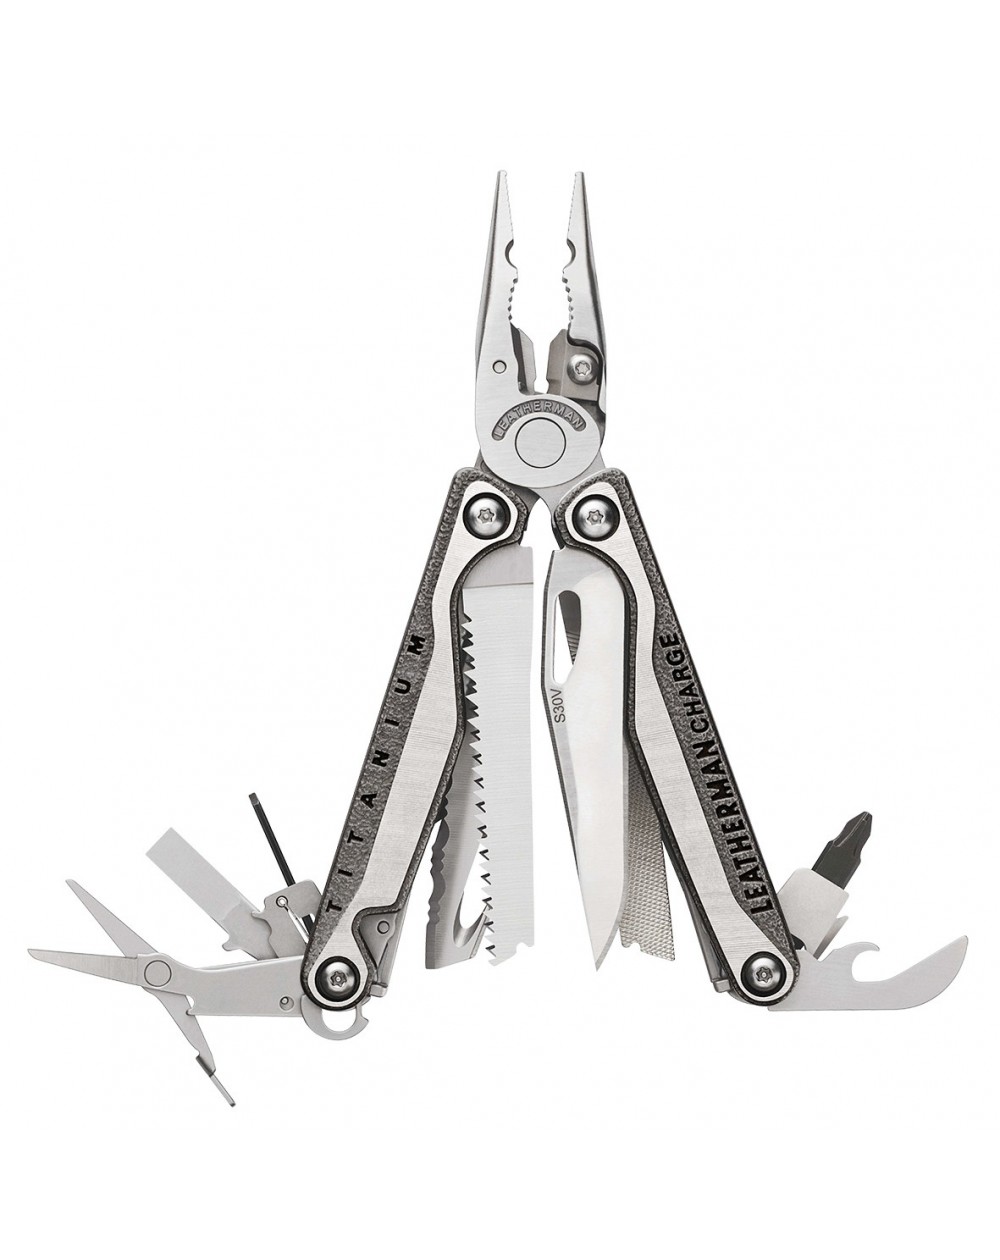 leatherman-pince-multifonctions-charge-tti-boite-832528-1